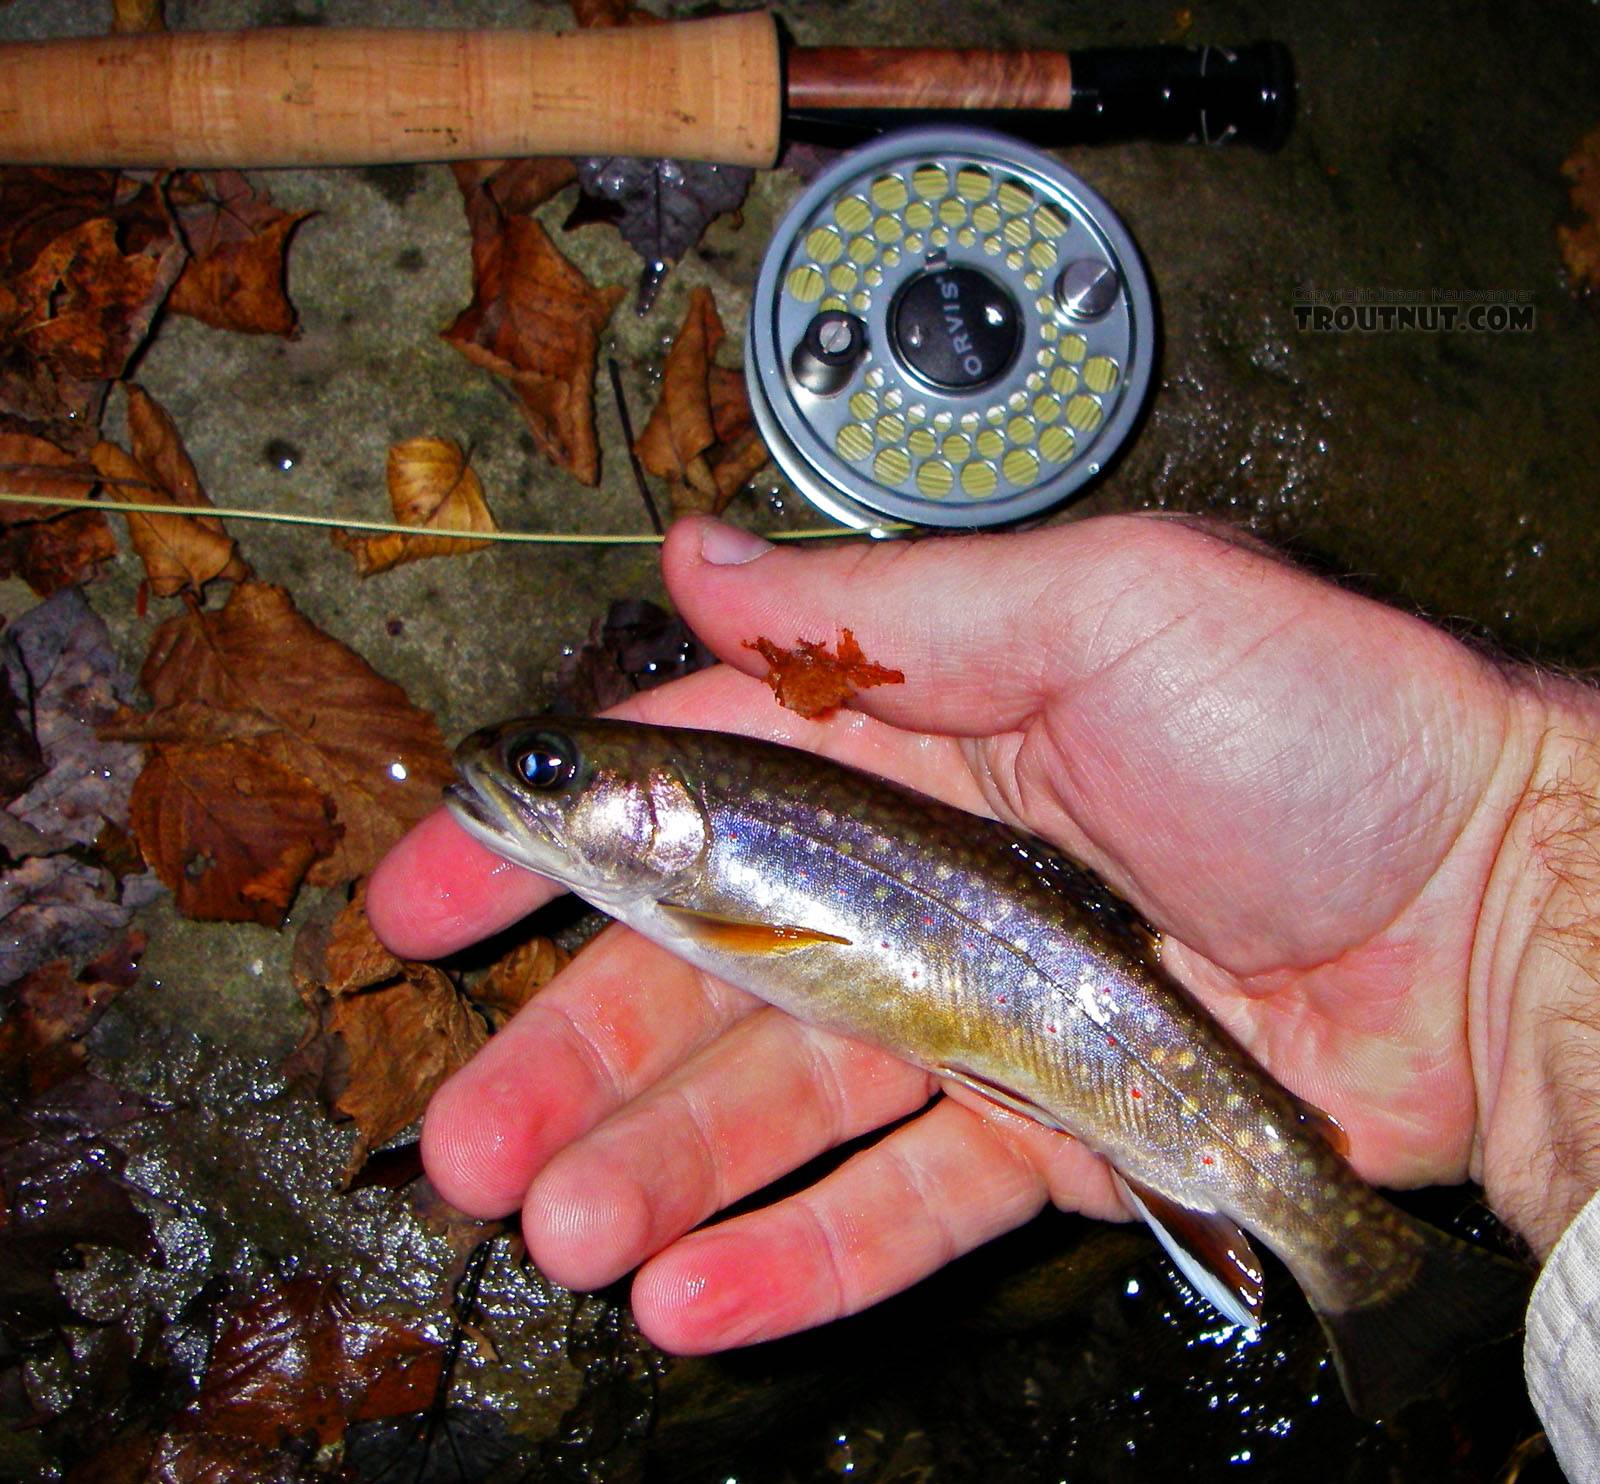 Here's the official first trout brought to hand with my new small-stream rod, an Orvis Superfine 7' 4-weight.  It's an appropriate fish from an appropriate water. From Mystery Creek # 89 in New York.